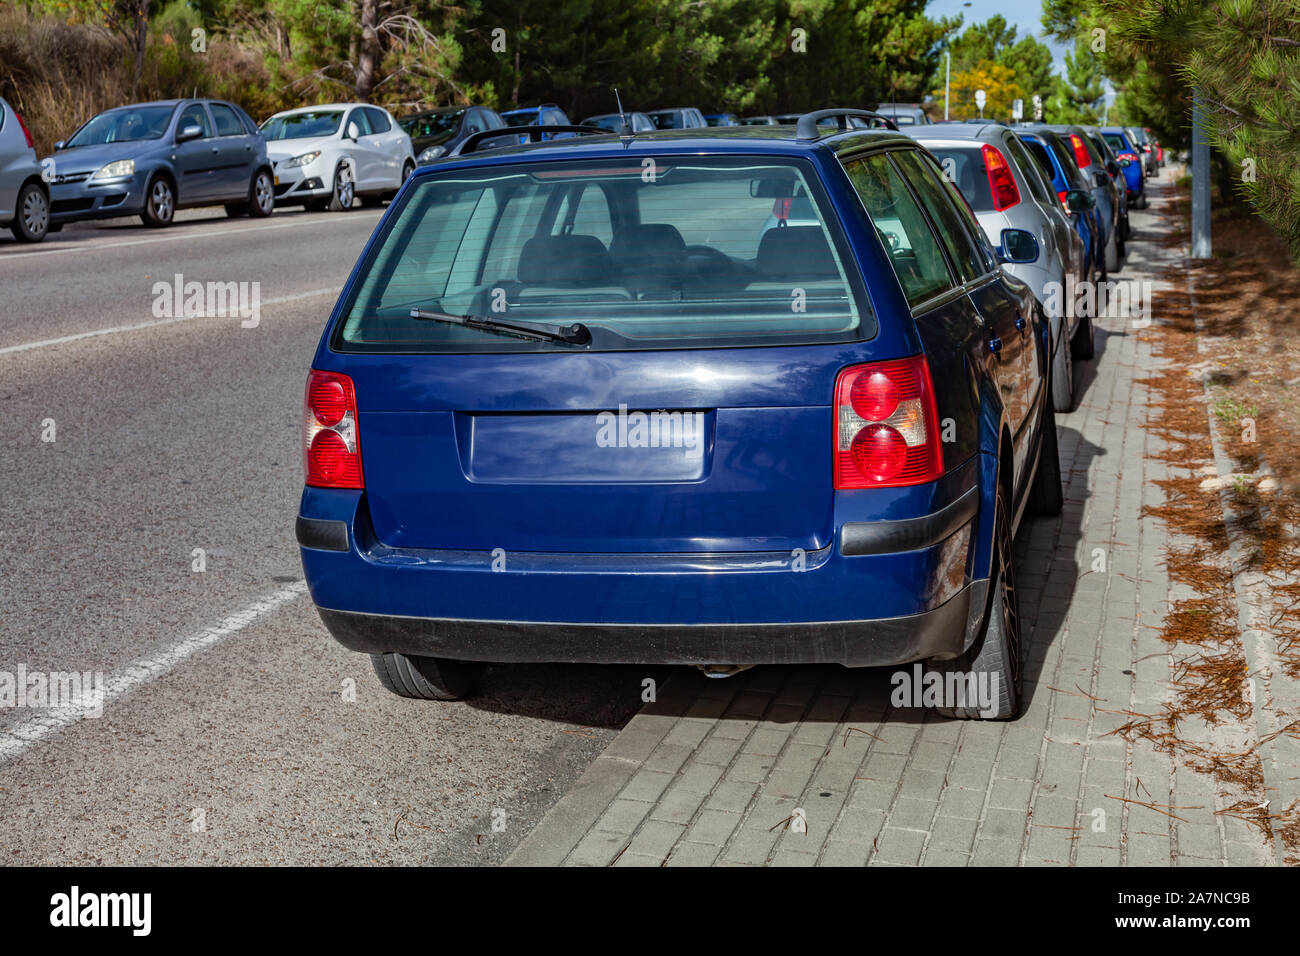 Cars or automobiles parked over the curb into sidewalk, leaving no space for pedestrians in the walkway. Road accessing a suburban railway. Illegal. Stock Photo